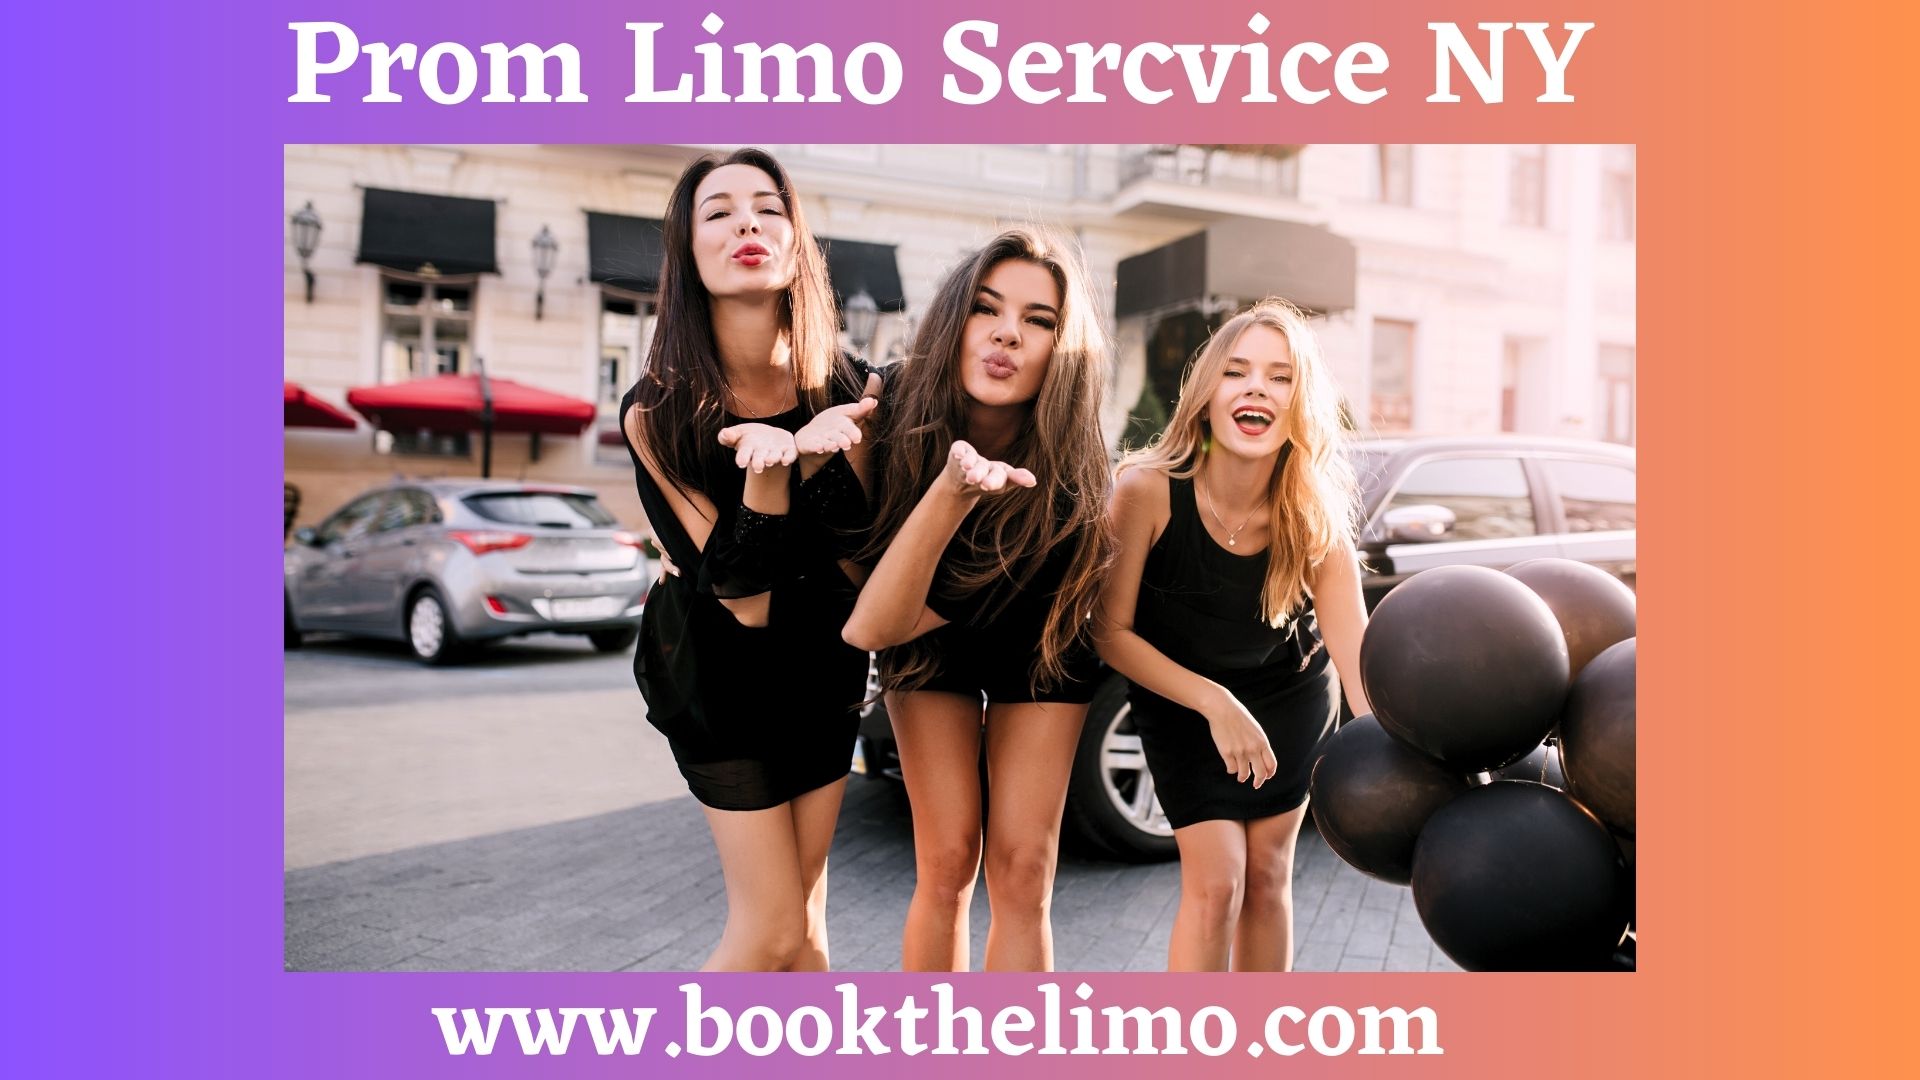 prom limo service ny - book the limo